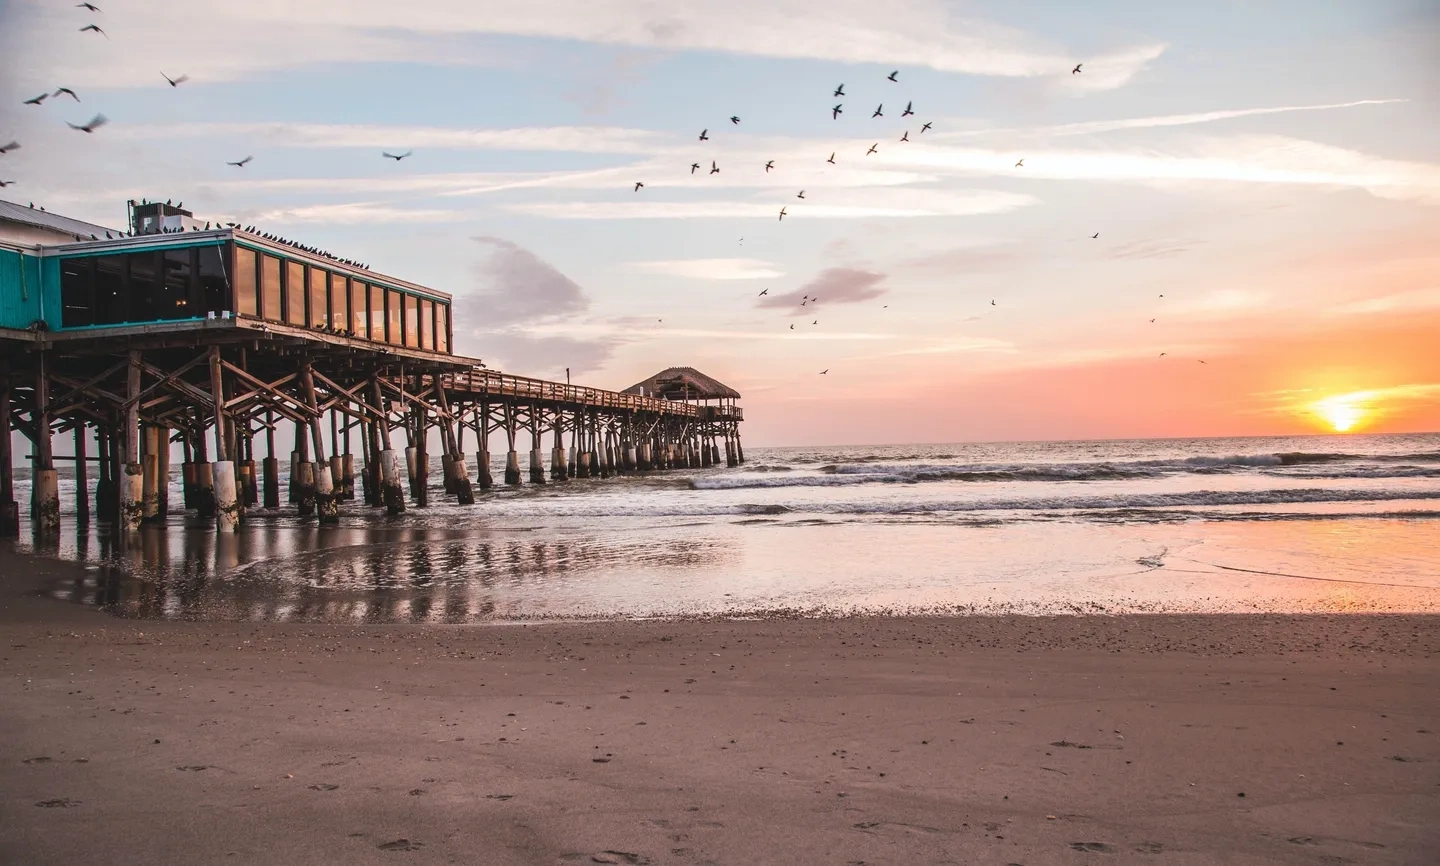 A pier with birds flying over it at sunset.